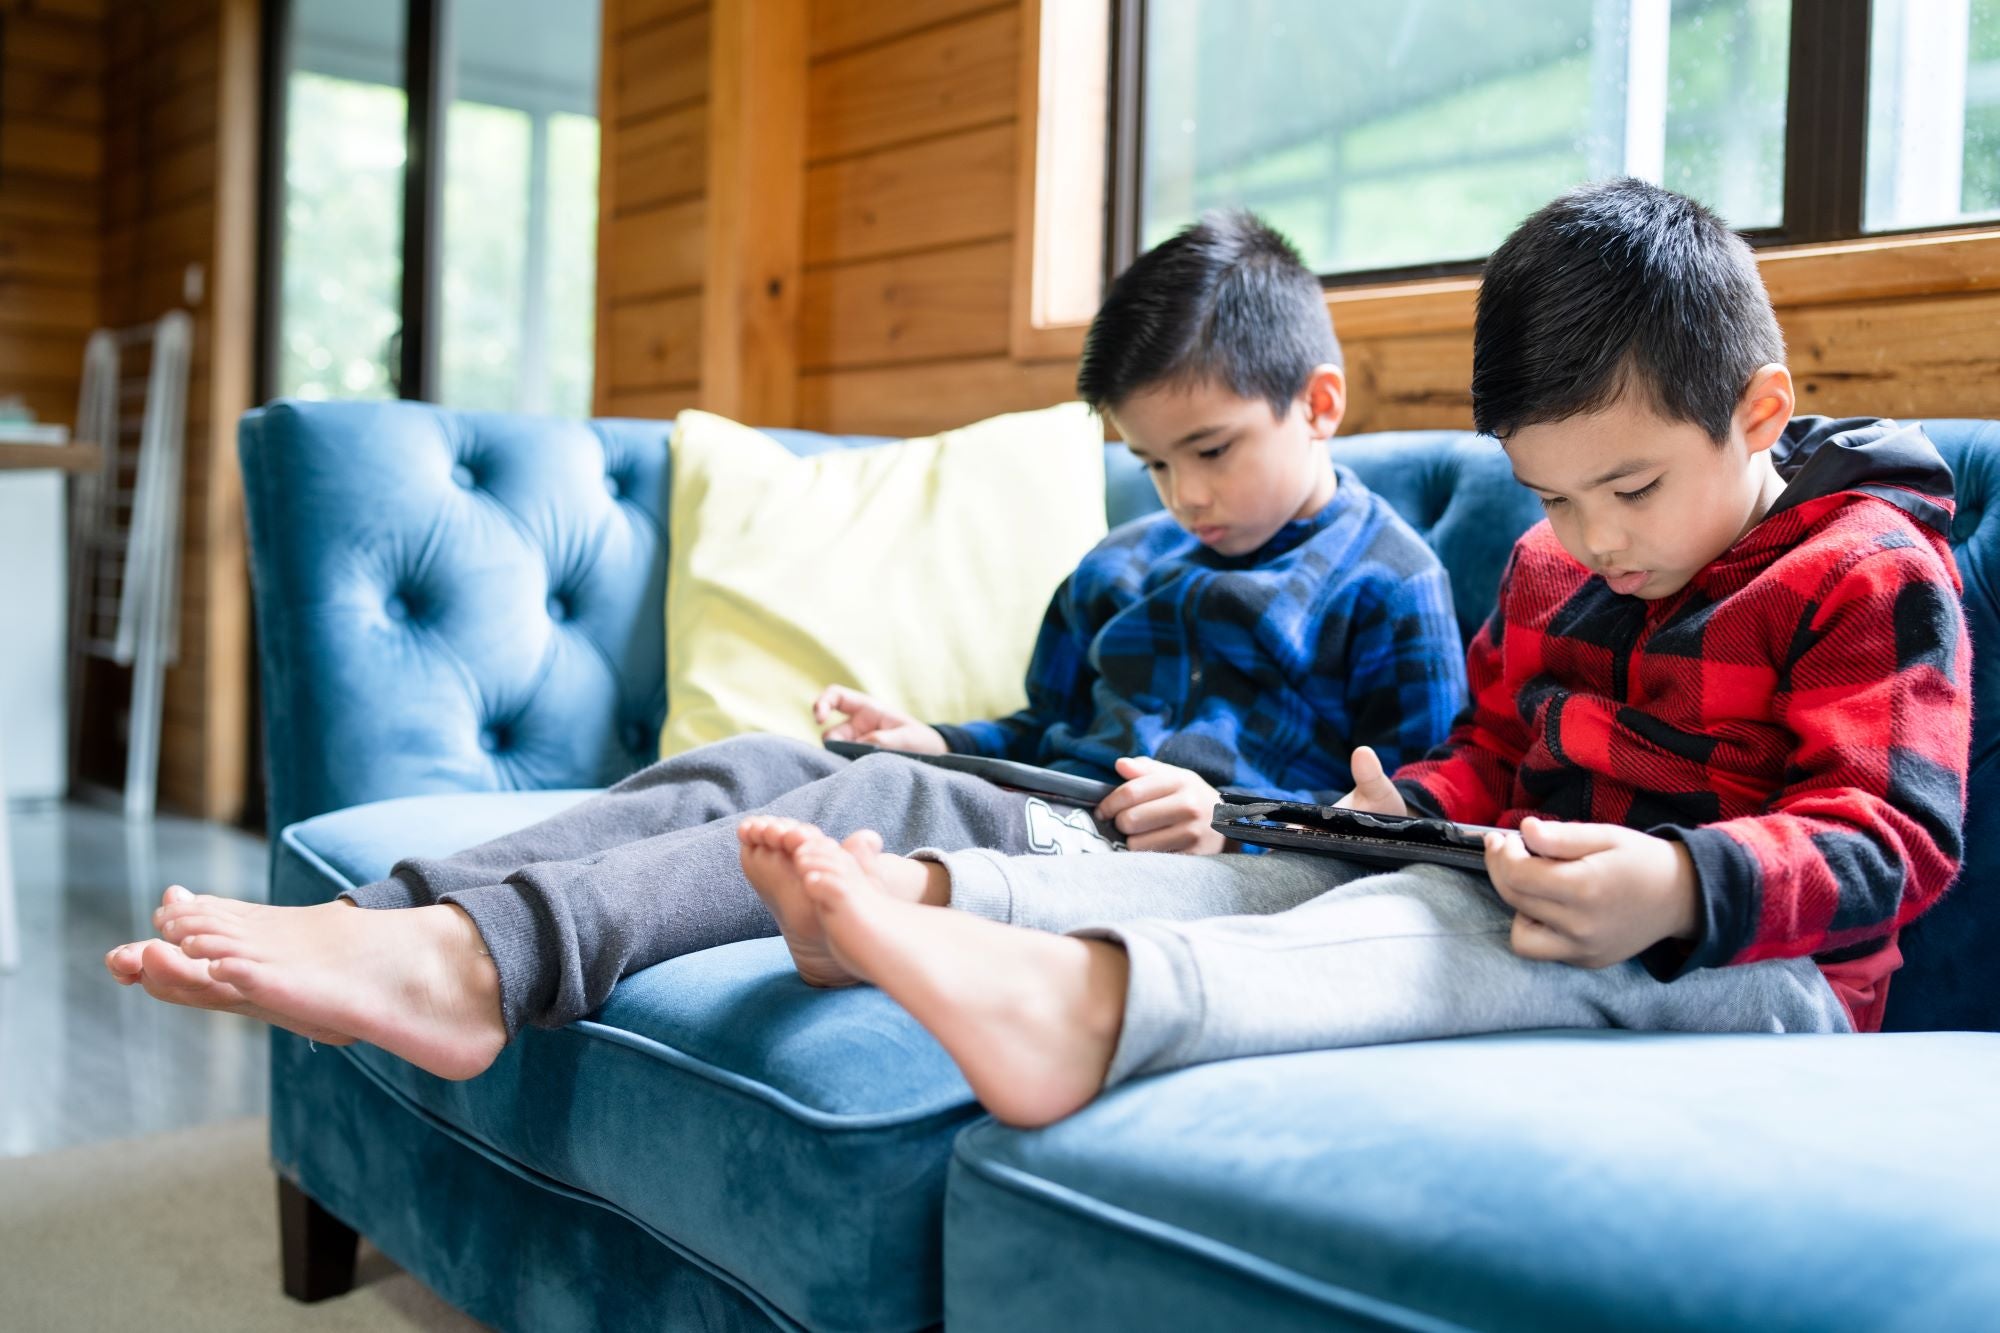 Screen Time For Kids - How Much Is Too Much?